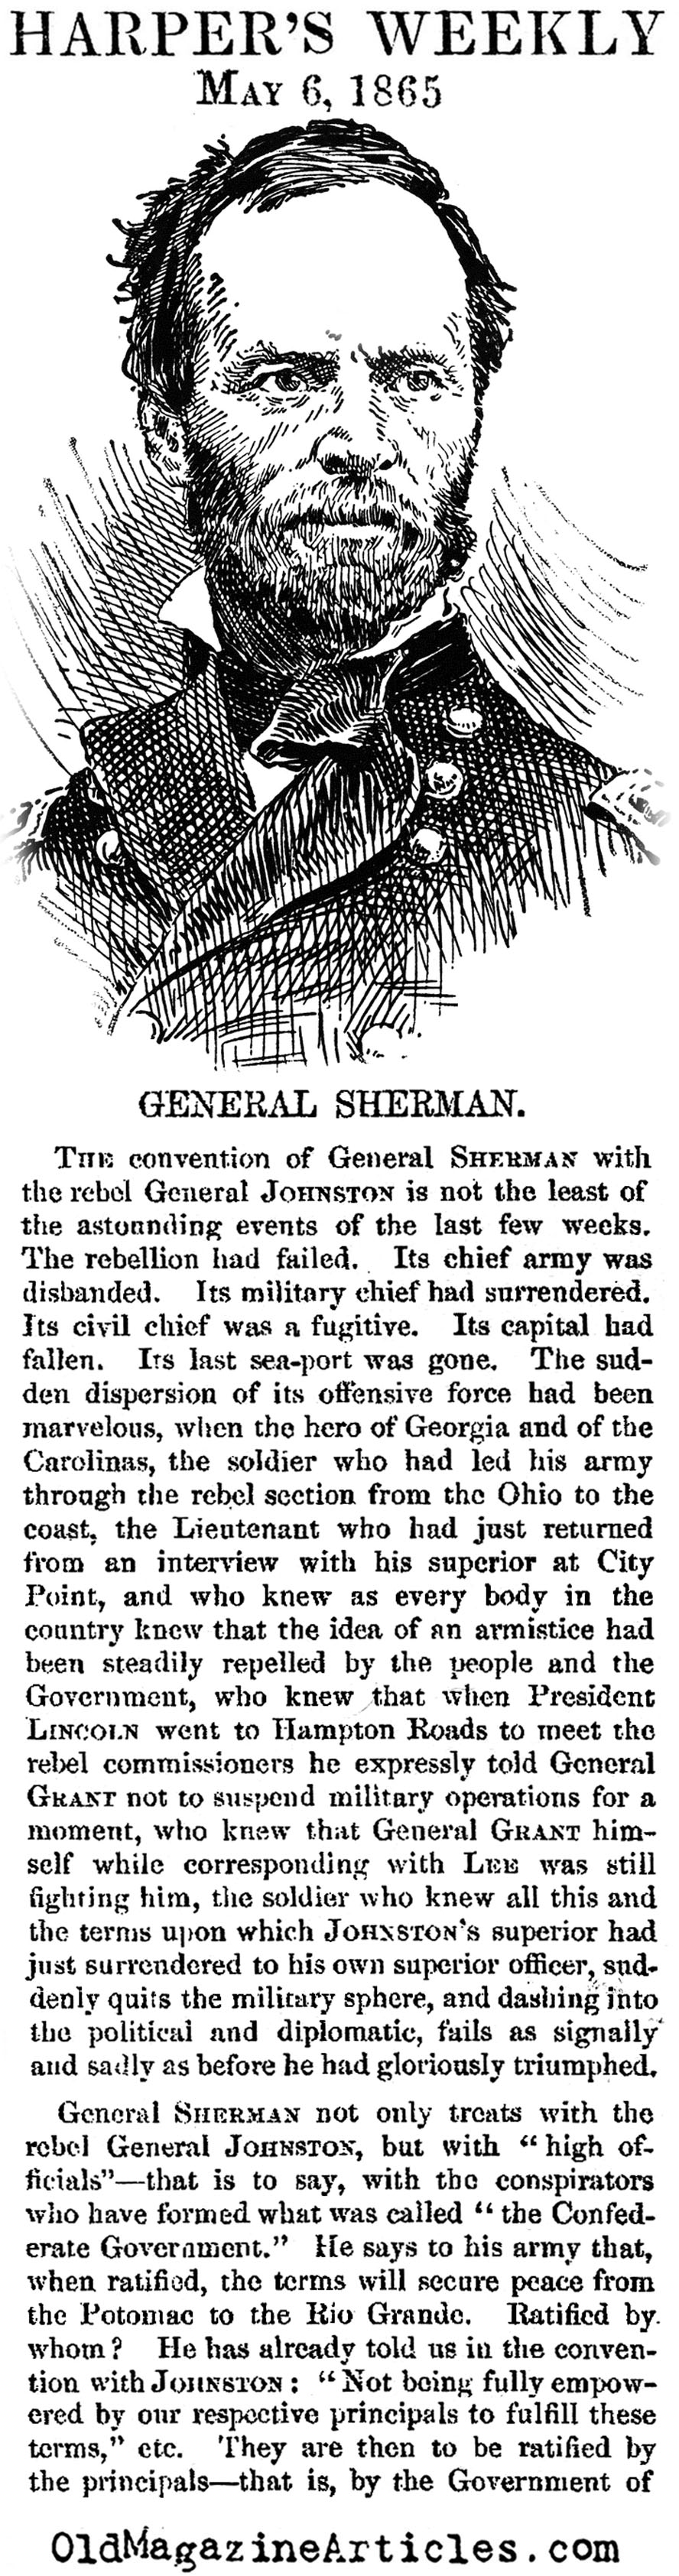 General Sherman and the Surrender in the West (Harper's Weekly, 1865)